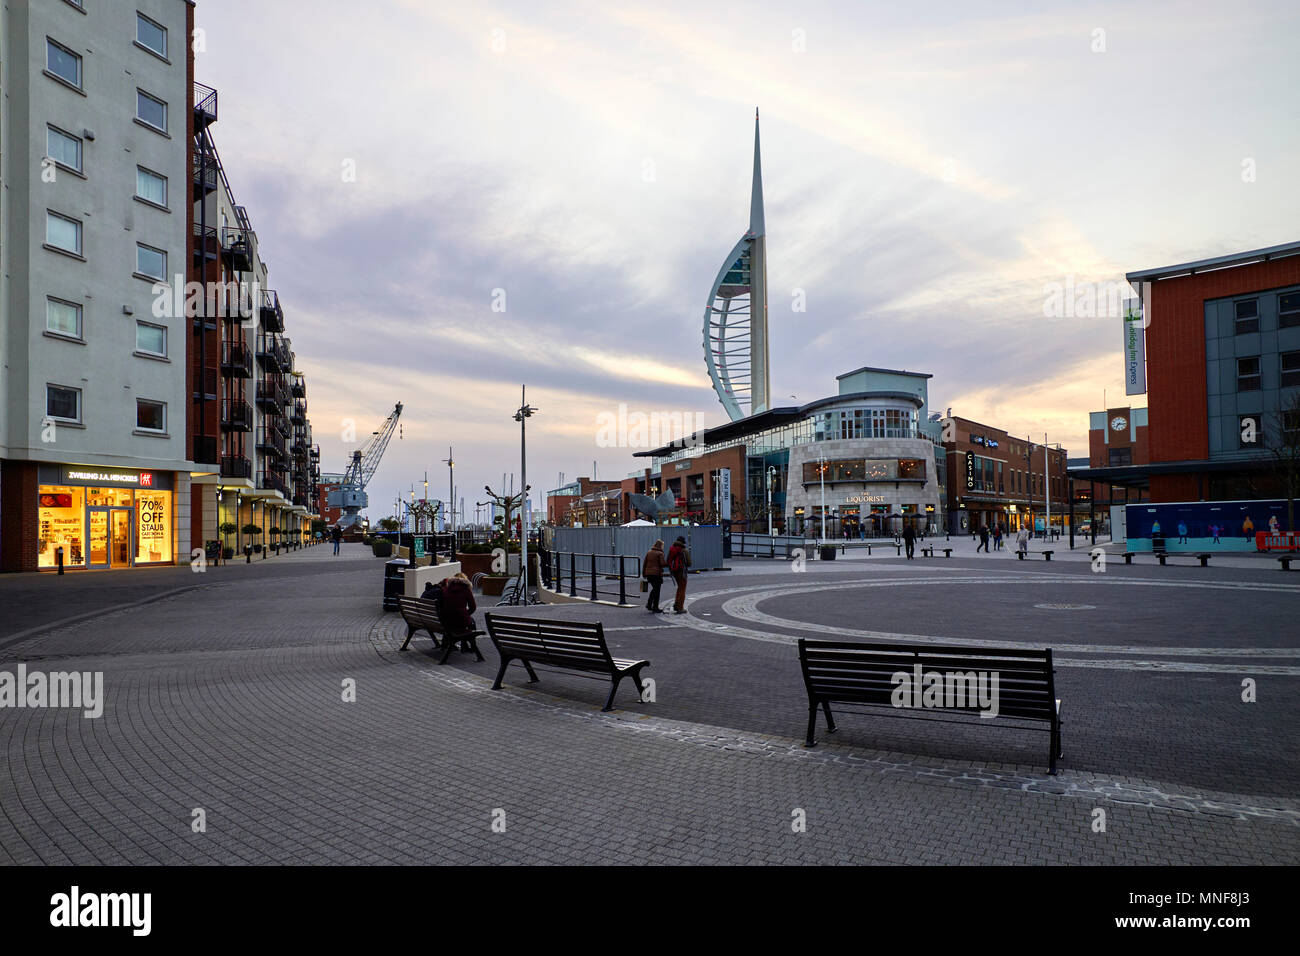 Early evening in Gunwharf Quays shopping centre, Portsmouth Stock Photo